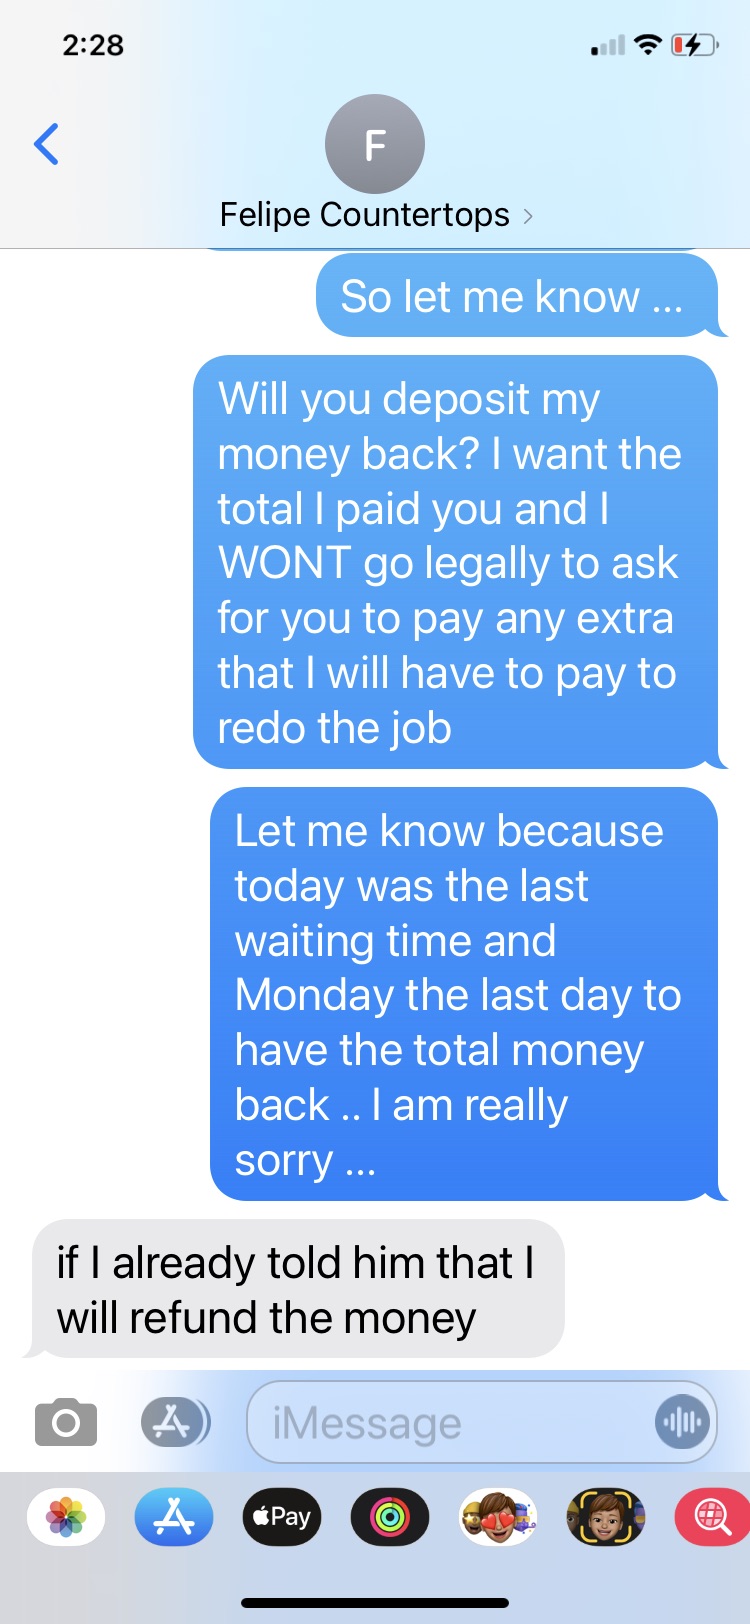 he confirming will return the money on Monday